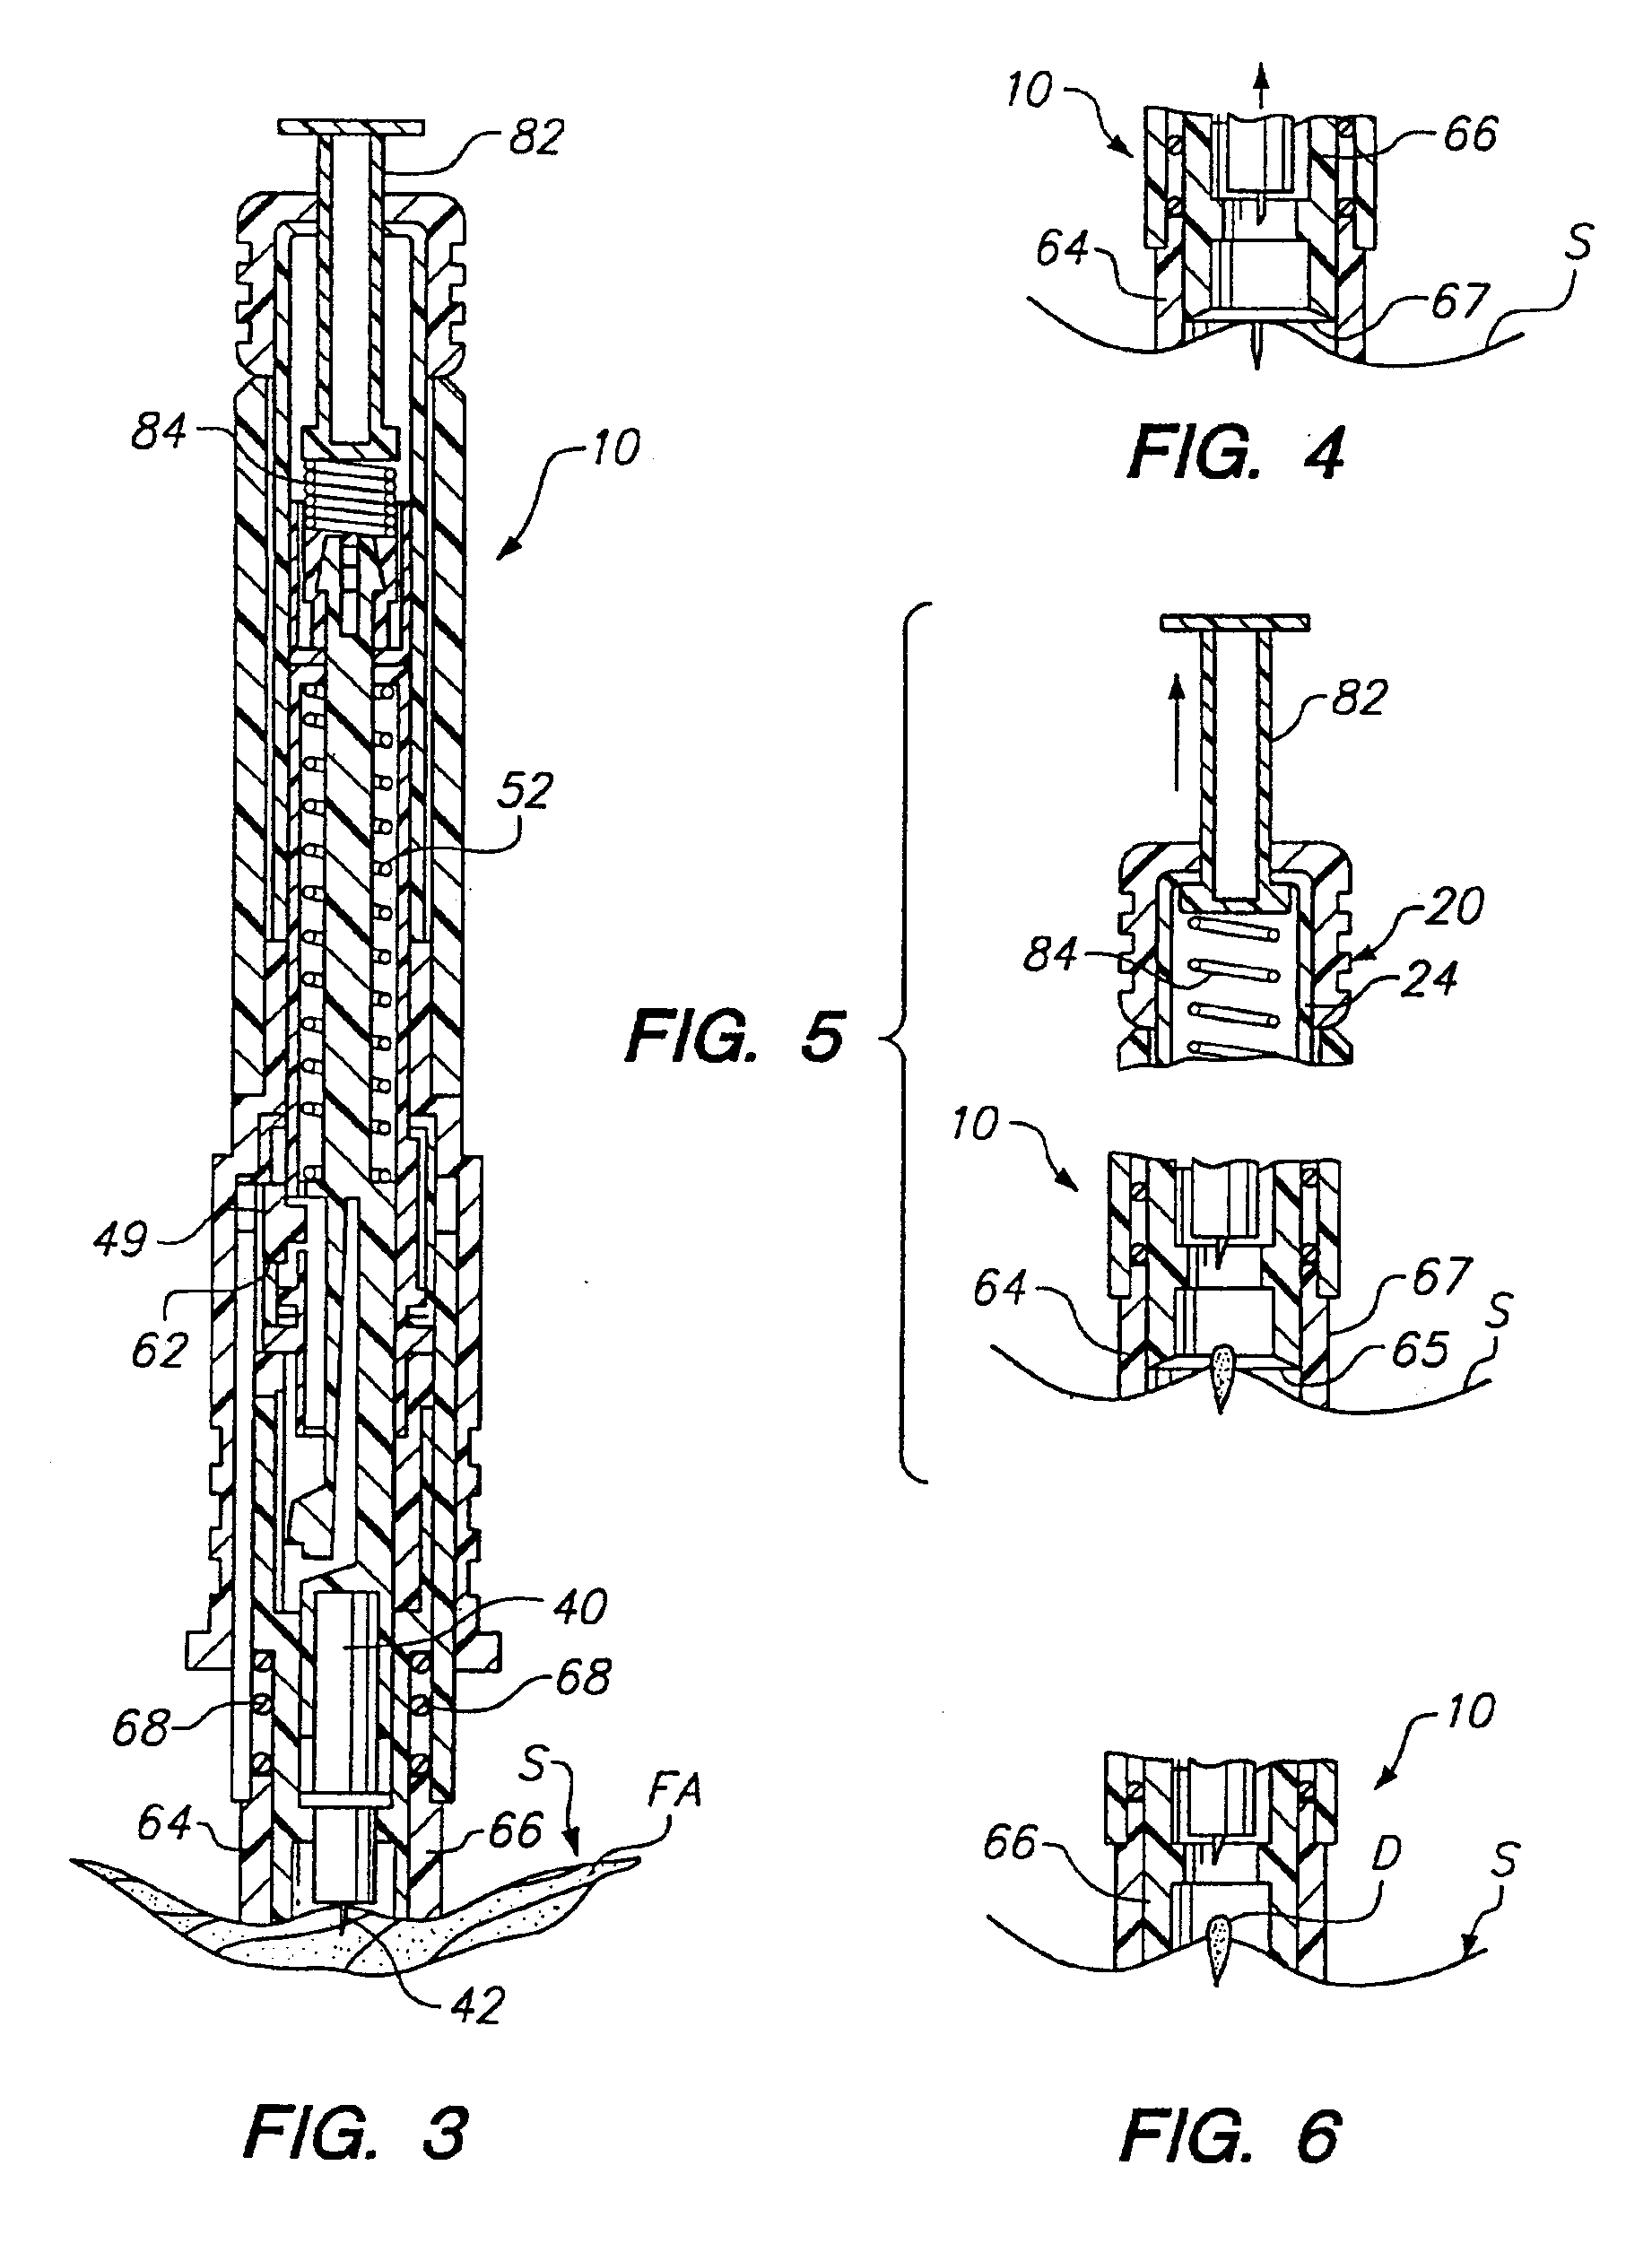 Methods and apparatus for suctioning and pumping body fluid from an incision